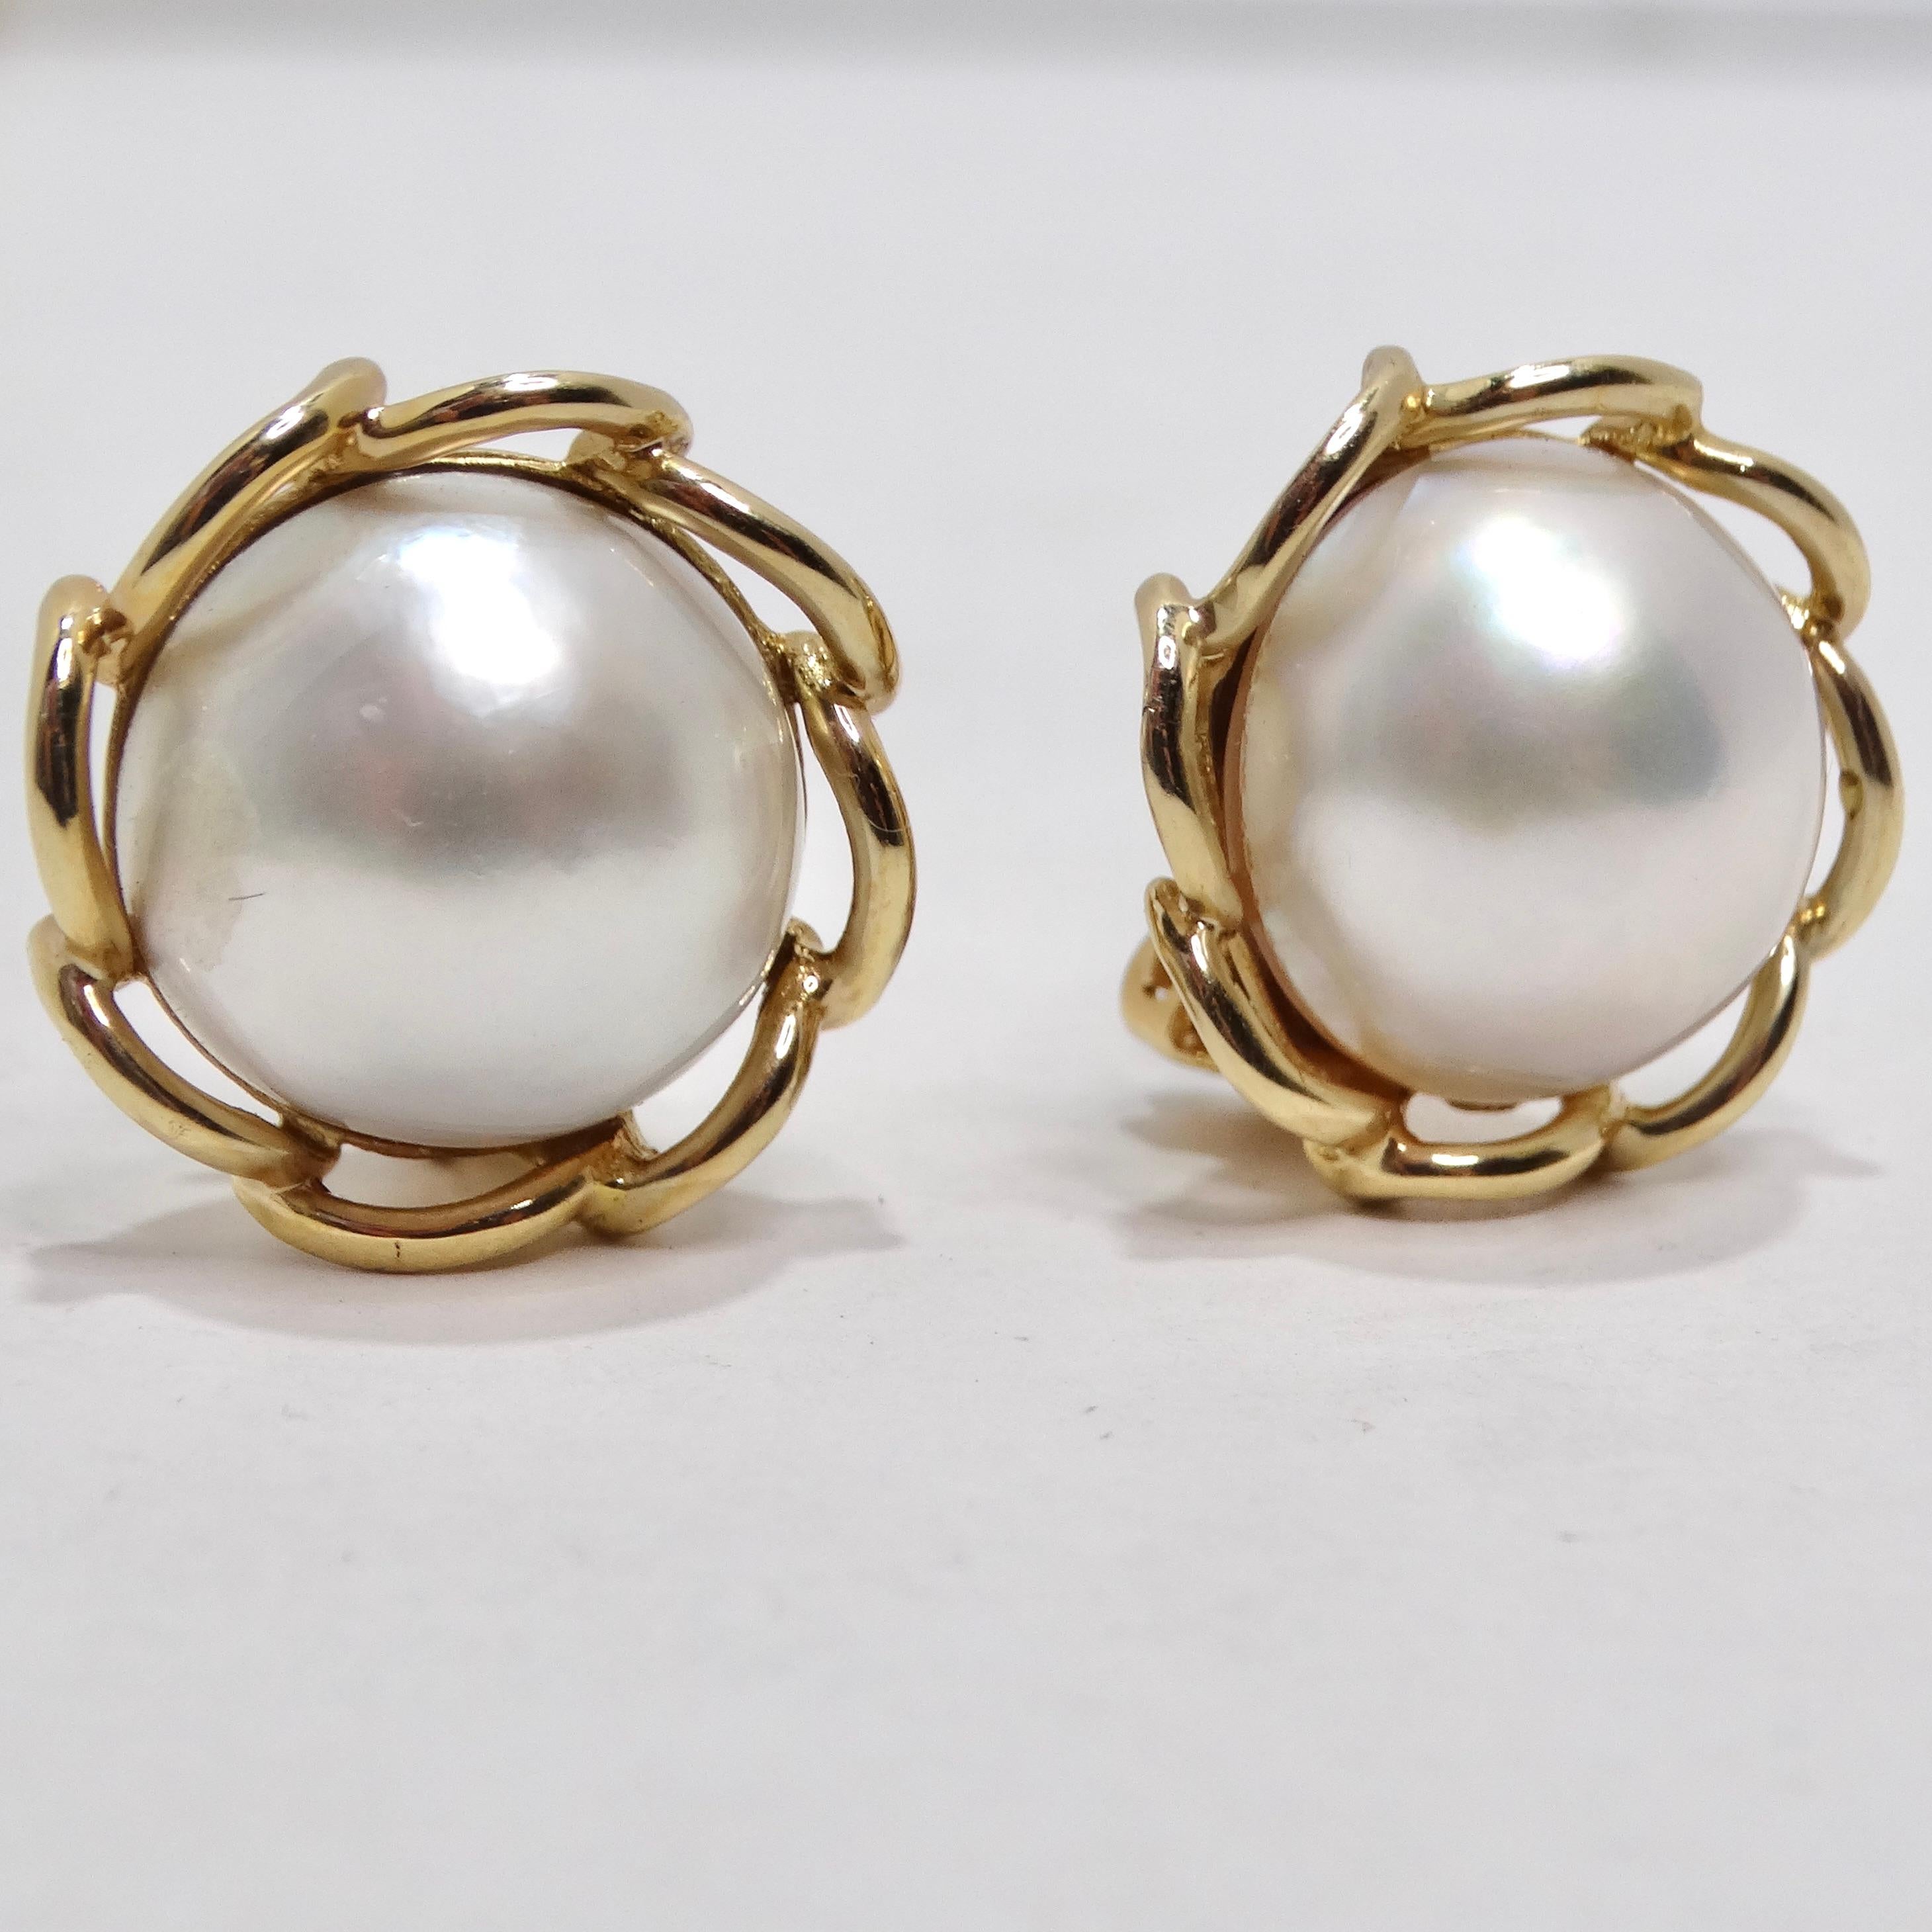 Introducing a pair of vintage earrings that embody the essence of timeless beauty and sophistication. The 1970s 14K Gold Pearl Clip-On Stud Earrings are a symbol of classic elegance, perfect for those who appreciate the enduring allure of vintage